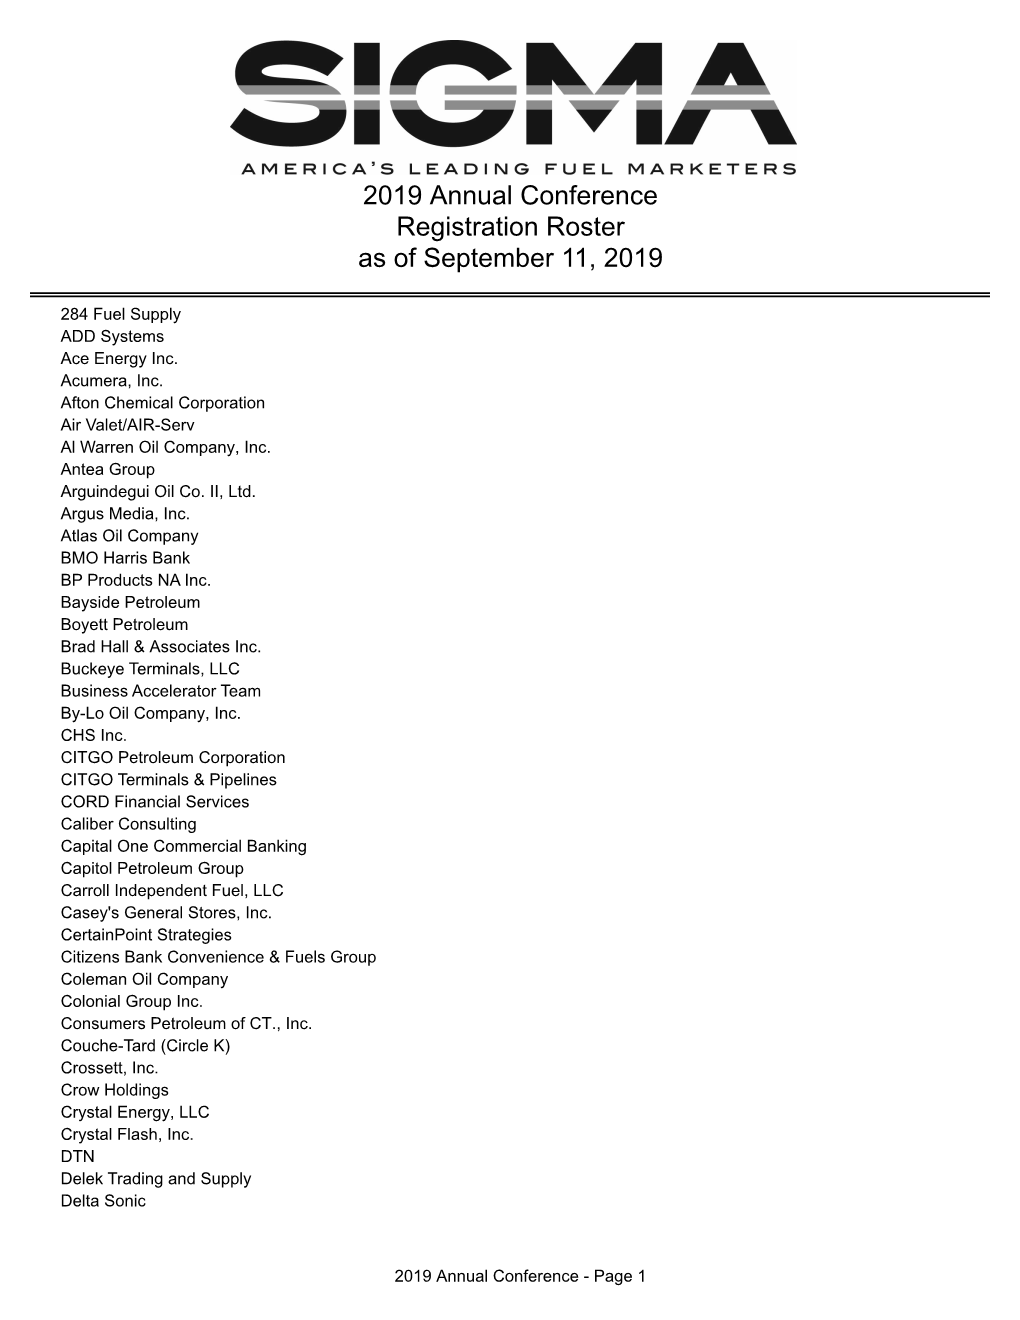 2019 Annual Conference Registration Roster As of September 11, 2019